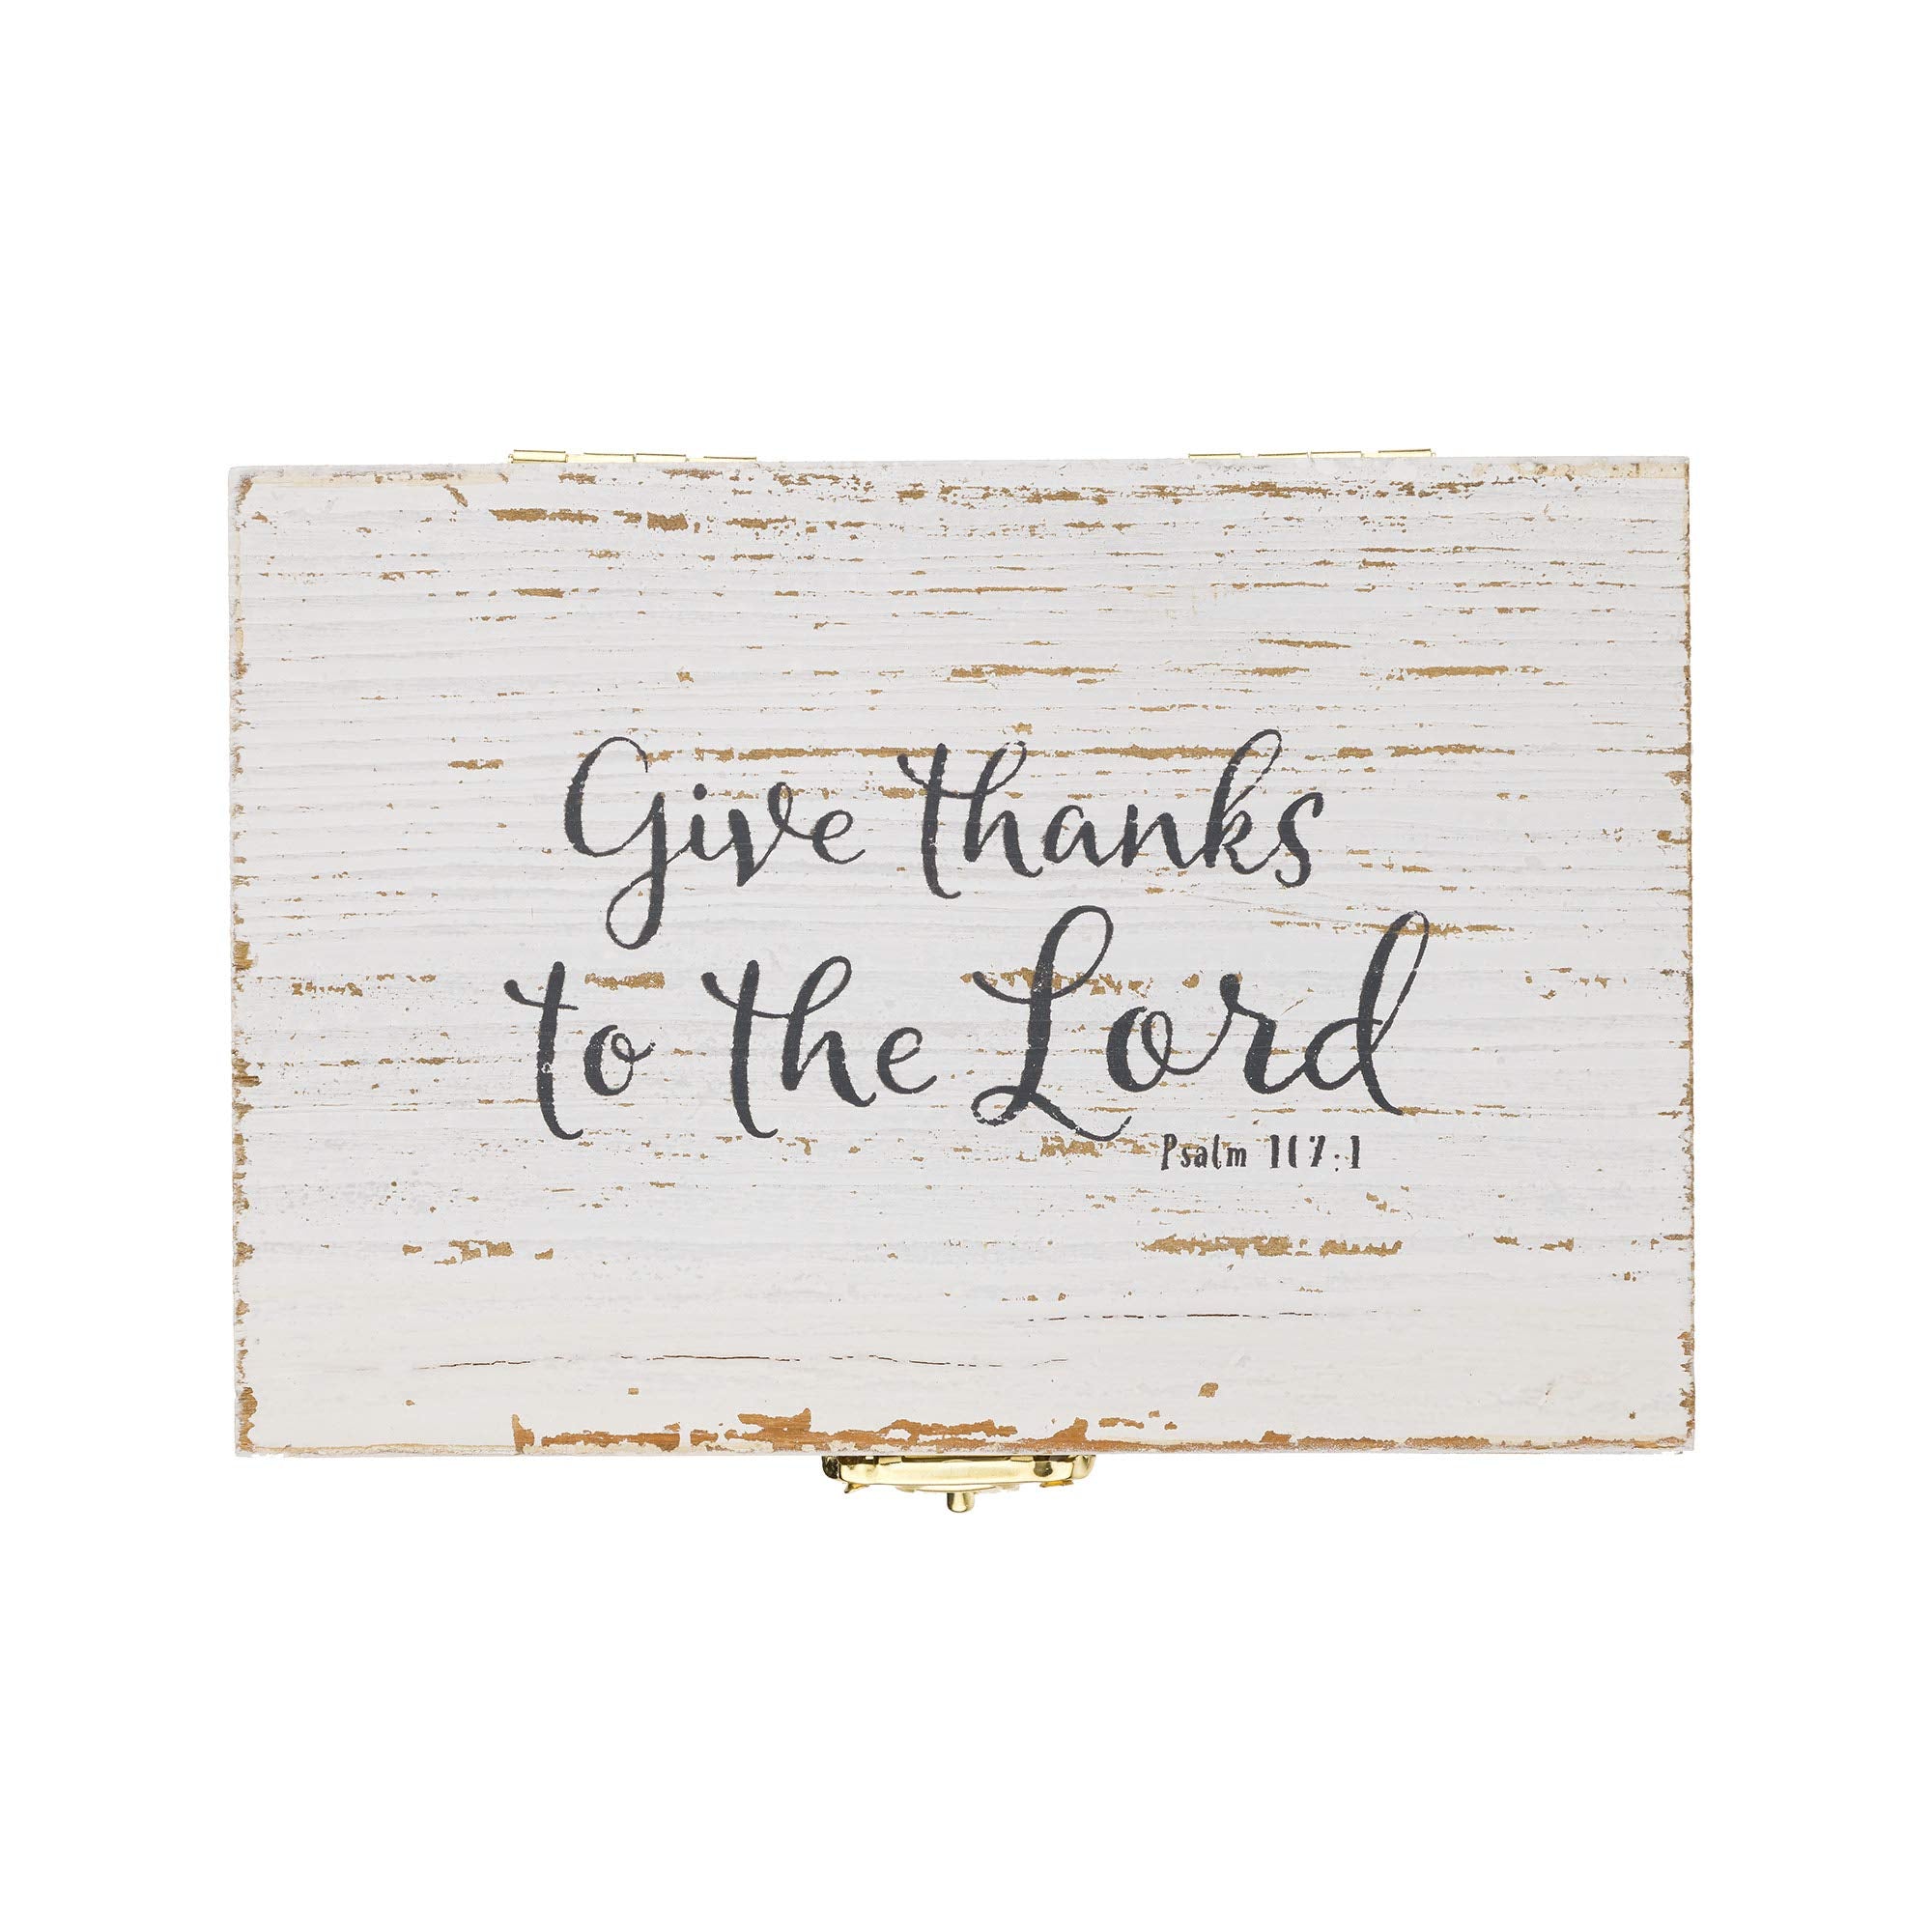 Gift Set Includes Decorative Prayer Box and 50 Designed Note Cards